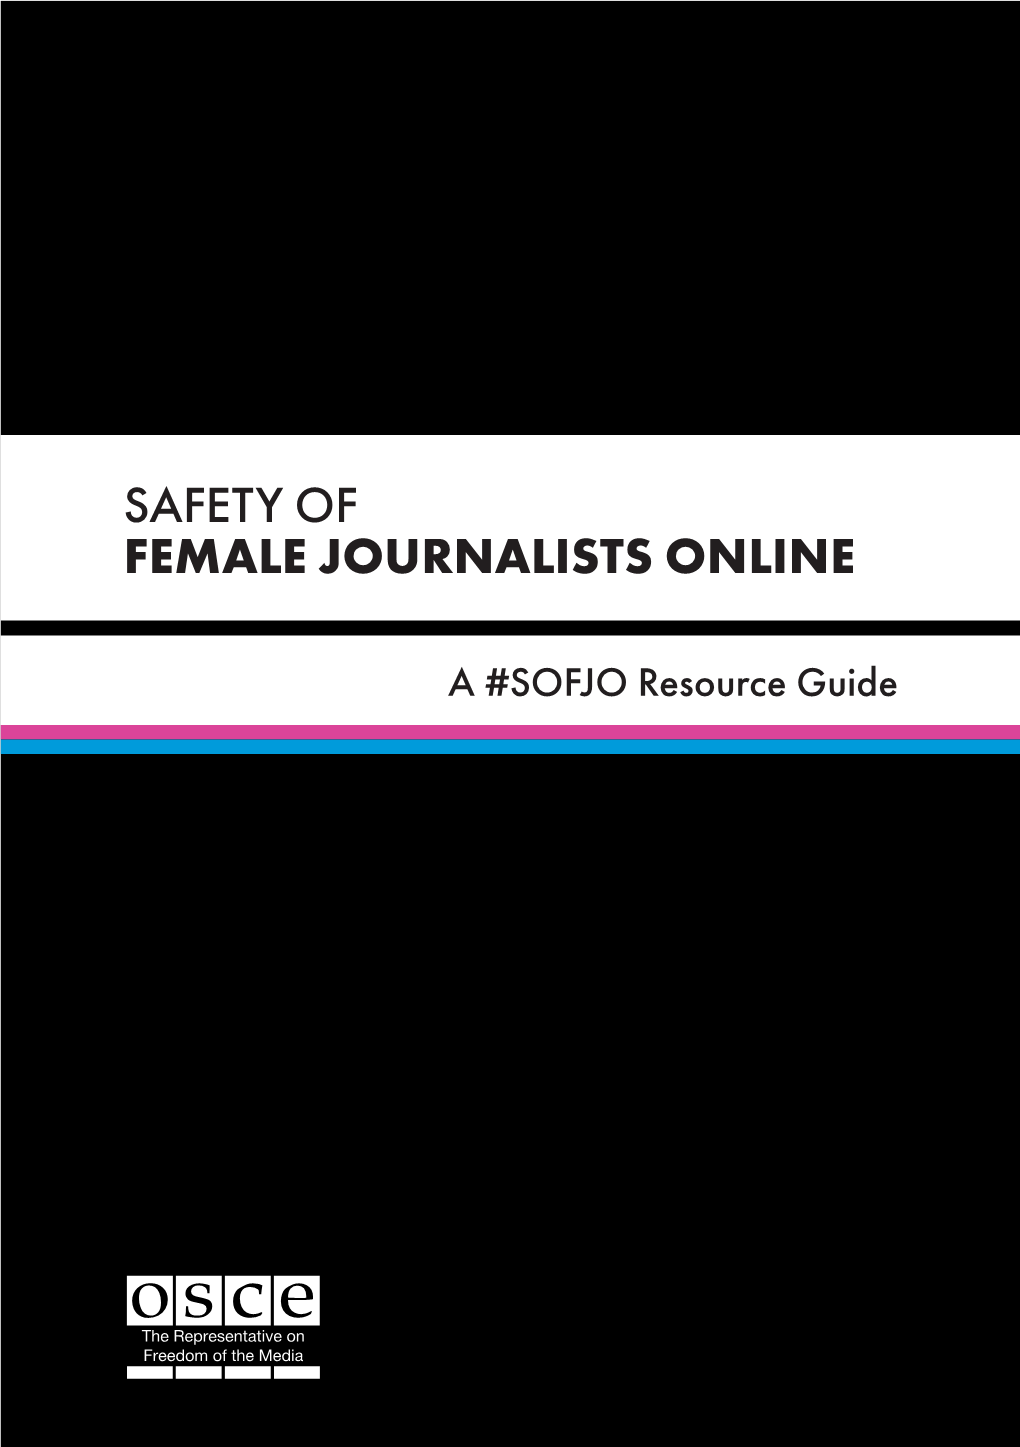 Safety of Female Journalists Online- a #SOFJO Resource Guide